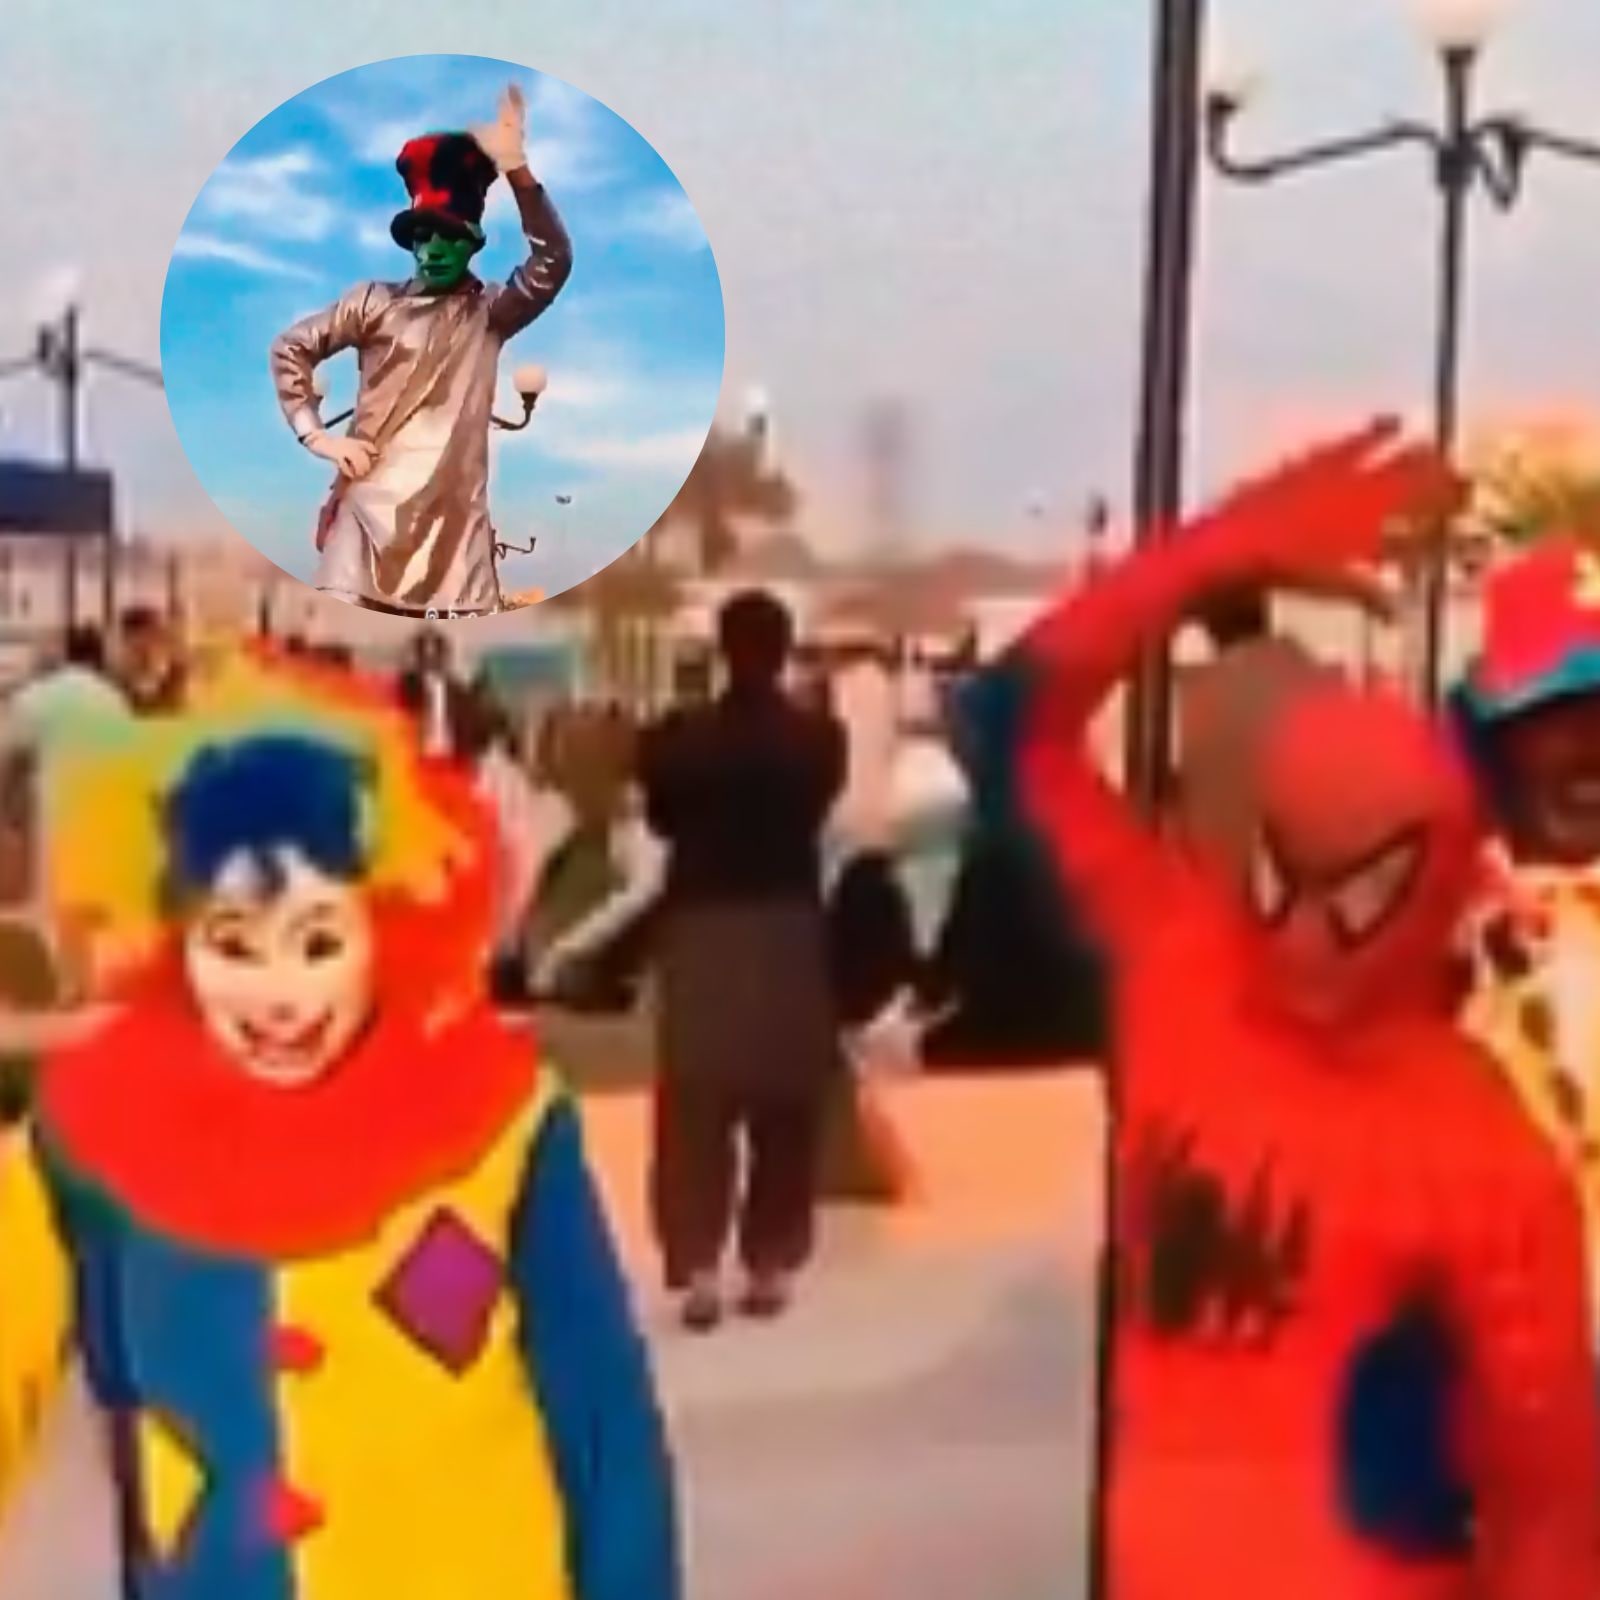 Video of Spiderman and Clown Dancing on Dhol Reminds the Internet of Indian  'Baraat'